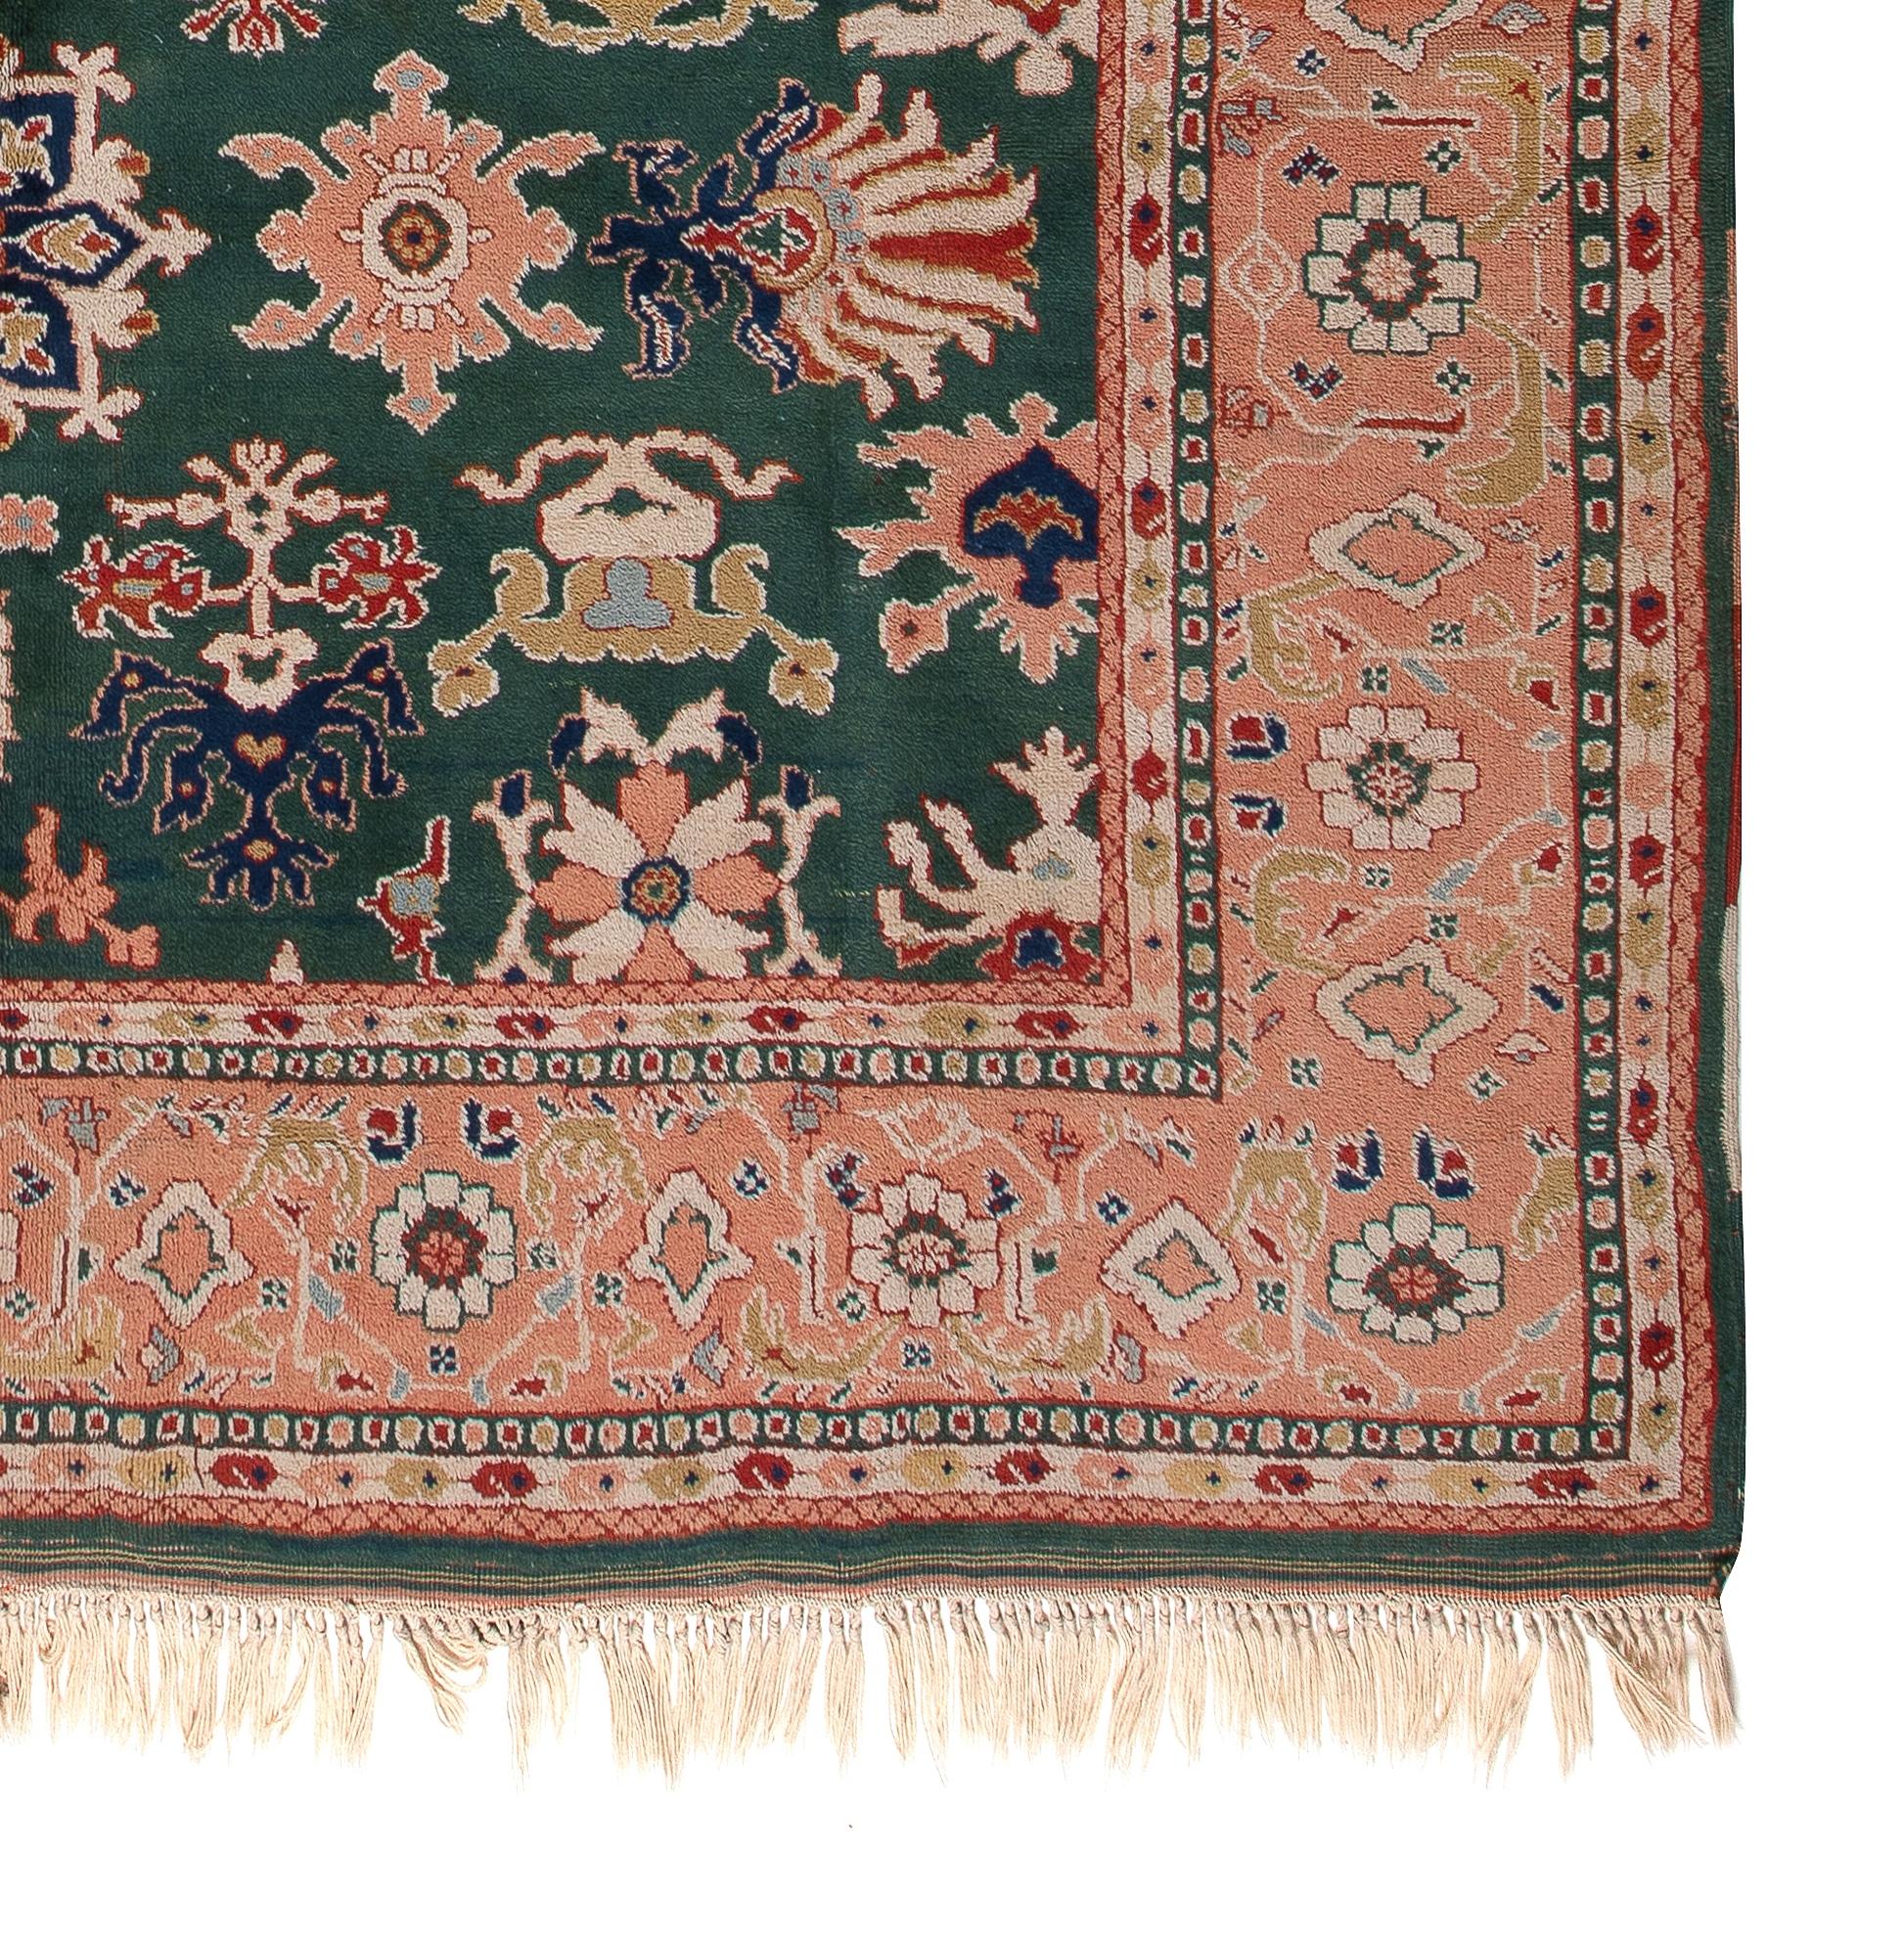 Hand-Knotted 8.4x10.2 Ft Emerald Green and Peach Turkish Rug, 100% Wool & Natural Dyes